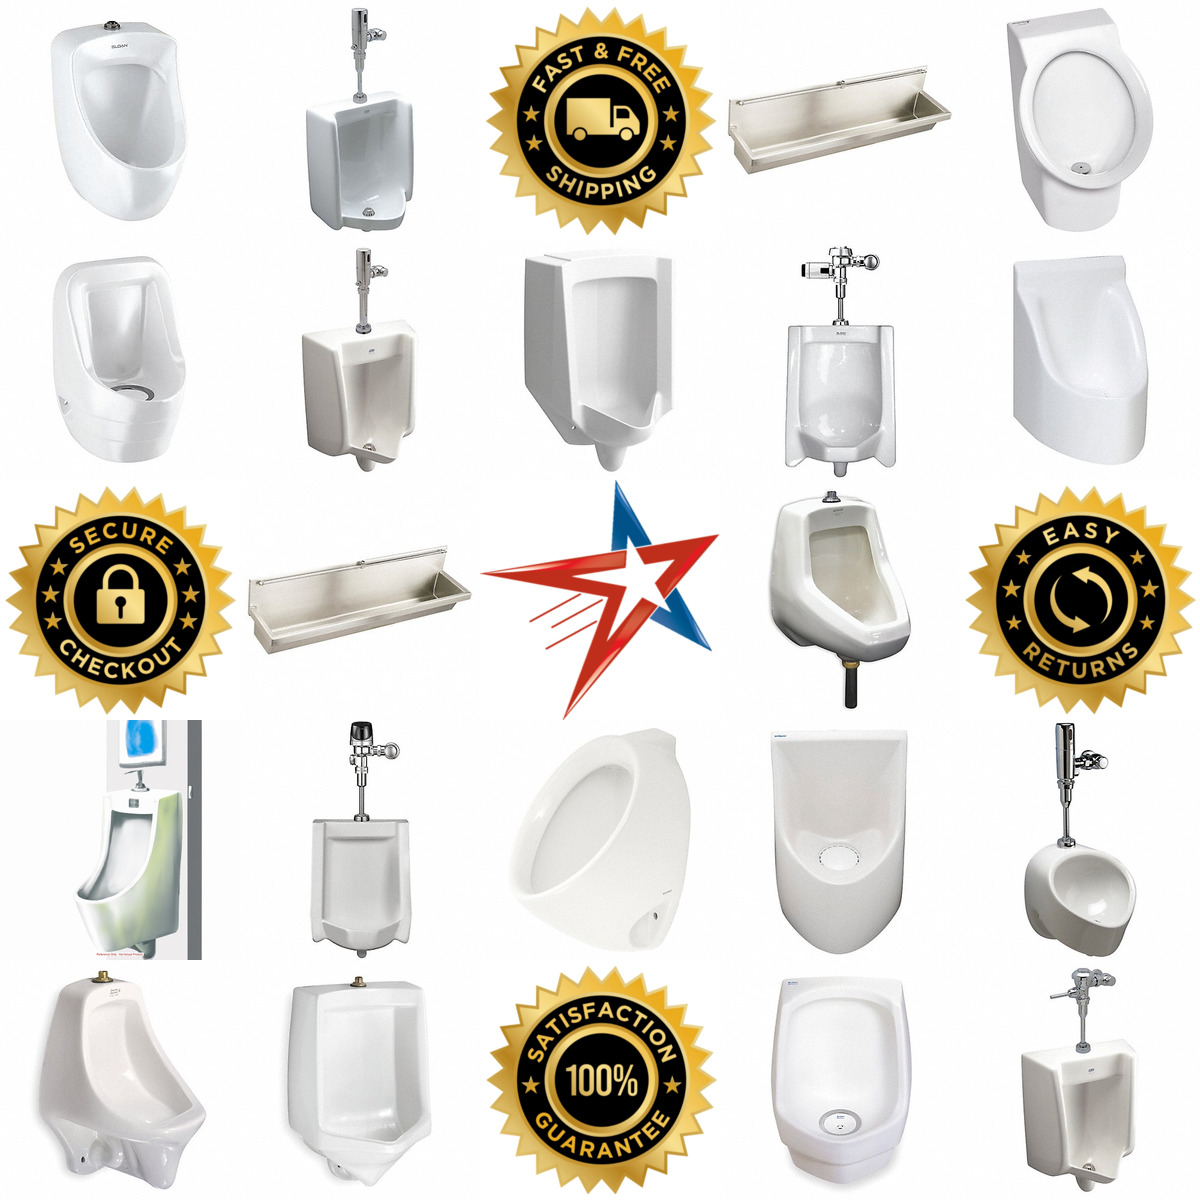 A selection of Urinals products on GoVets